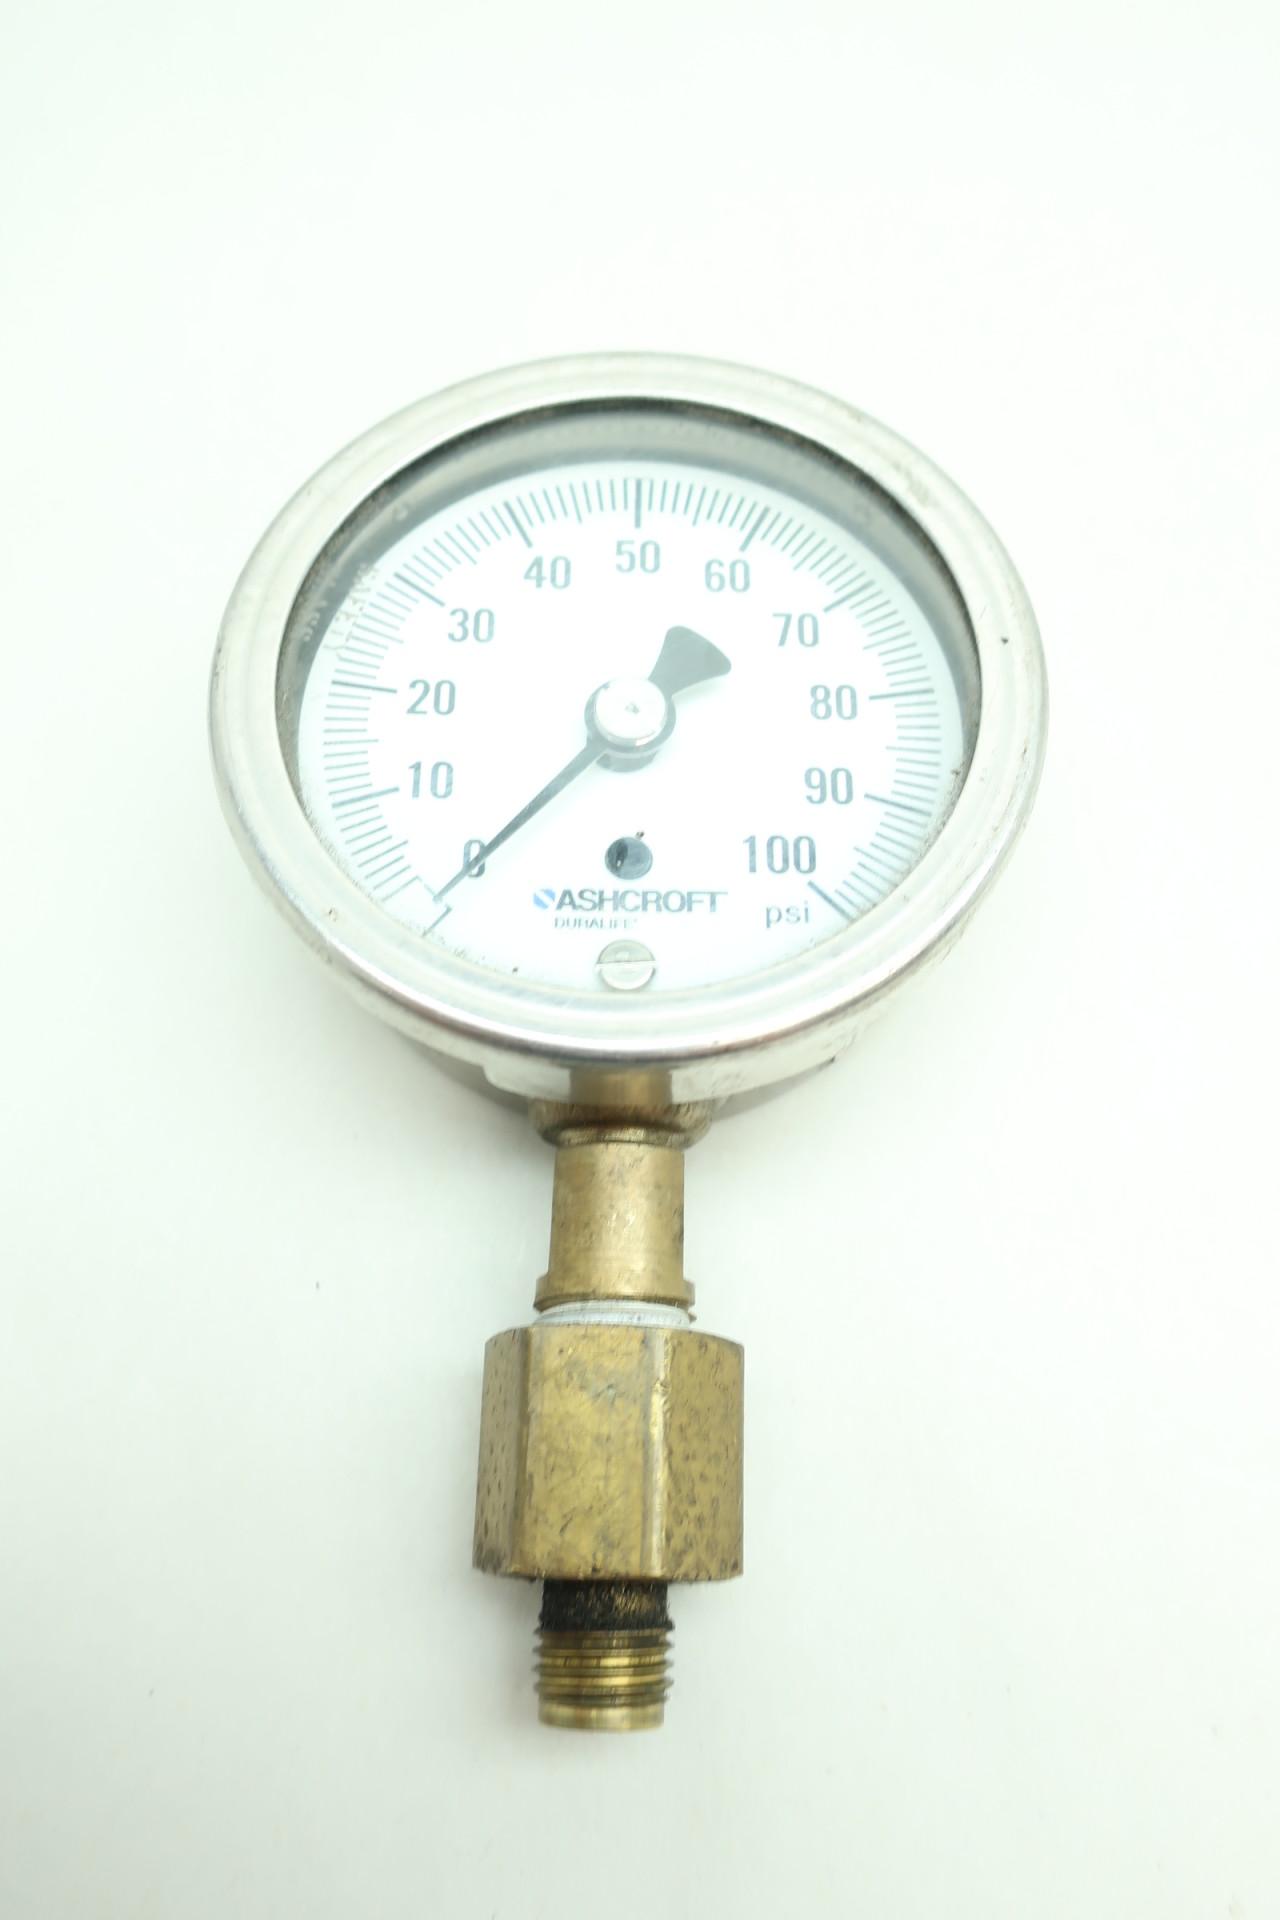 Details about   Ashcroft 8923-30PSI Fillable Pressure Gauge 30PSI 2-1/2" Dial 1/2"NPT  USED 